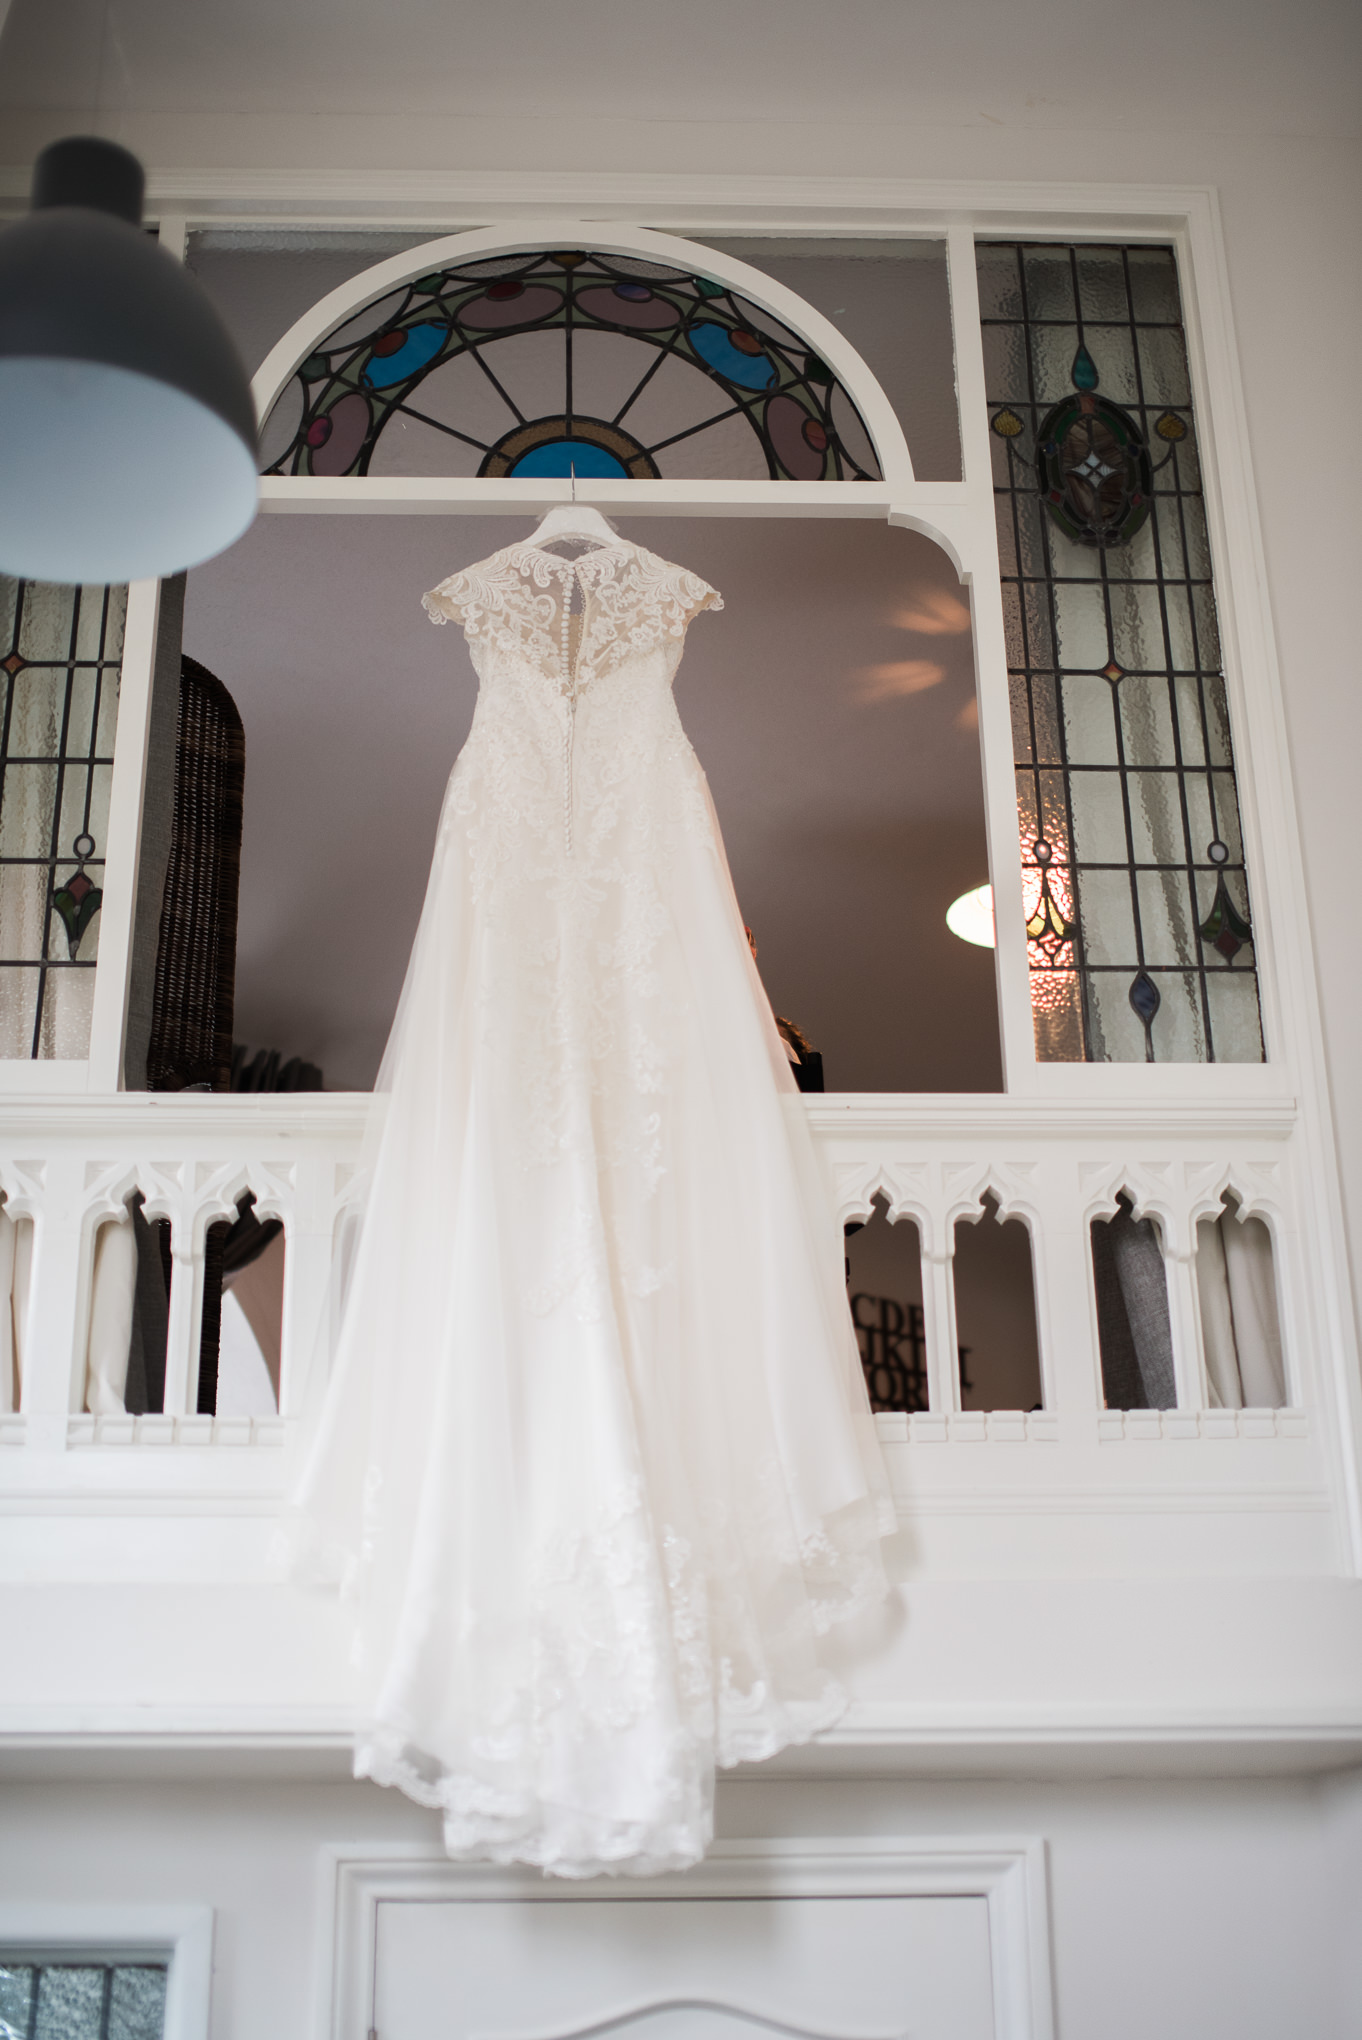 Full length shot of wedding dress hung from a window in the Dreamcatcher.